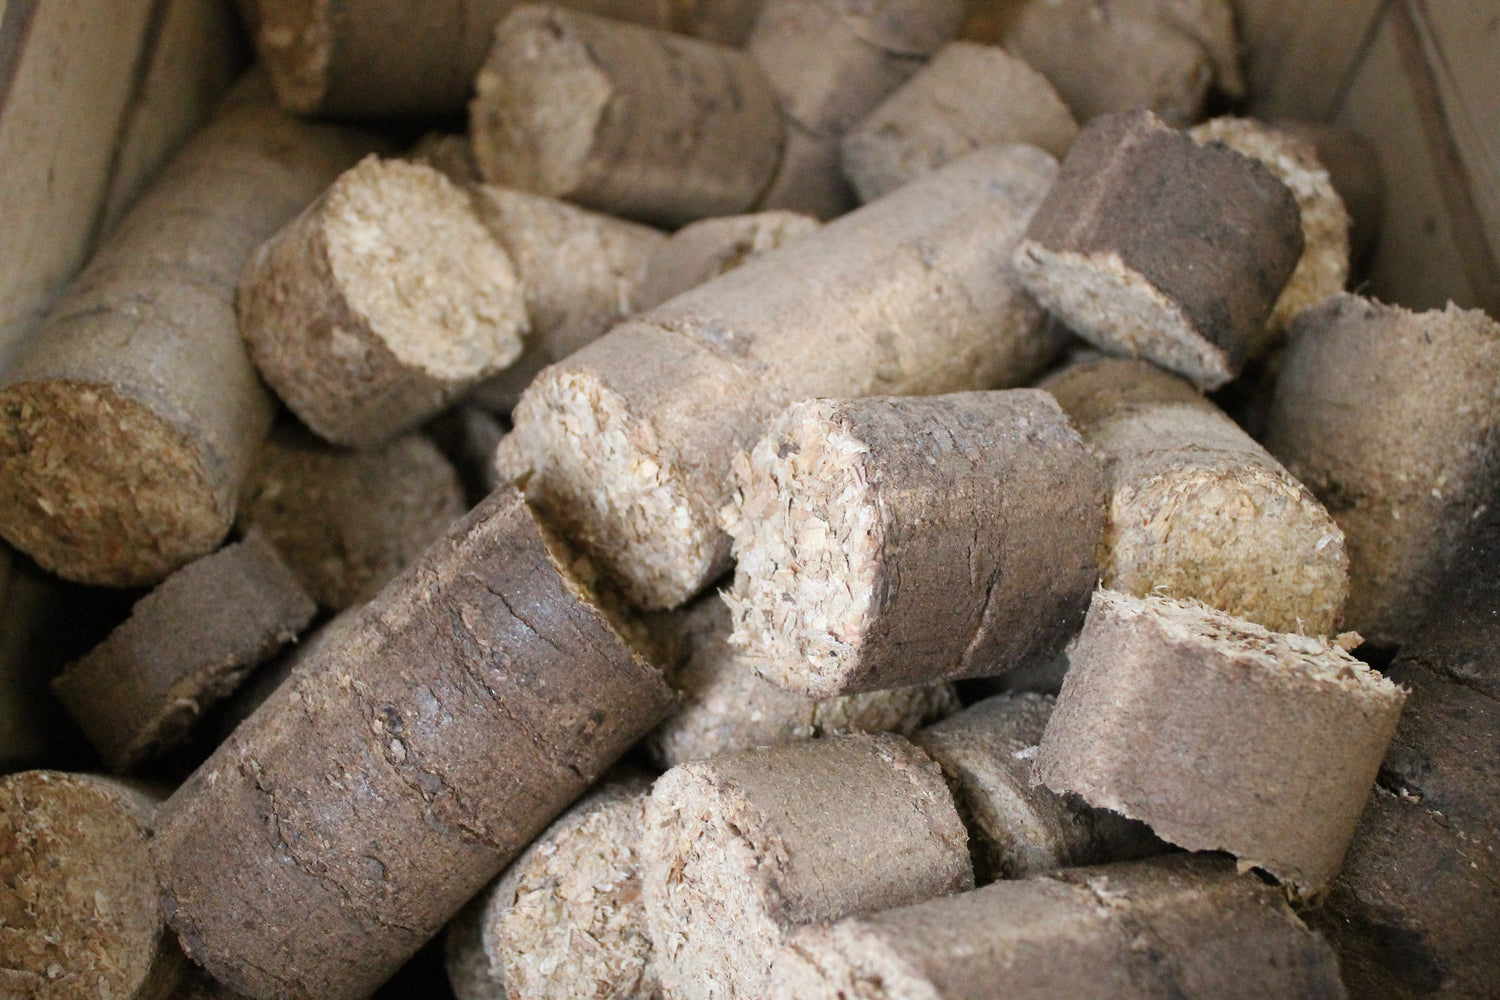 Sawdust briquettes made from wooden floorboard byproduct